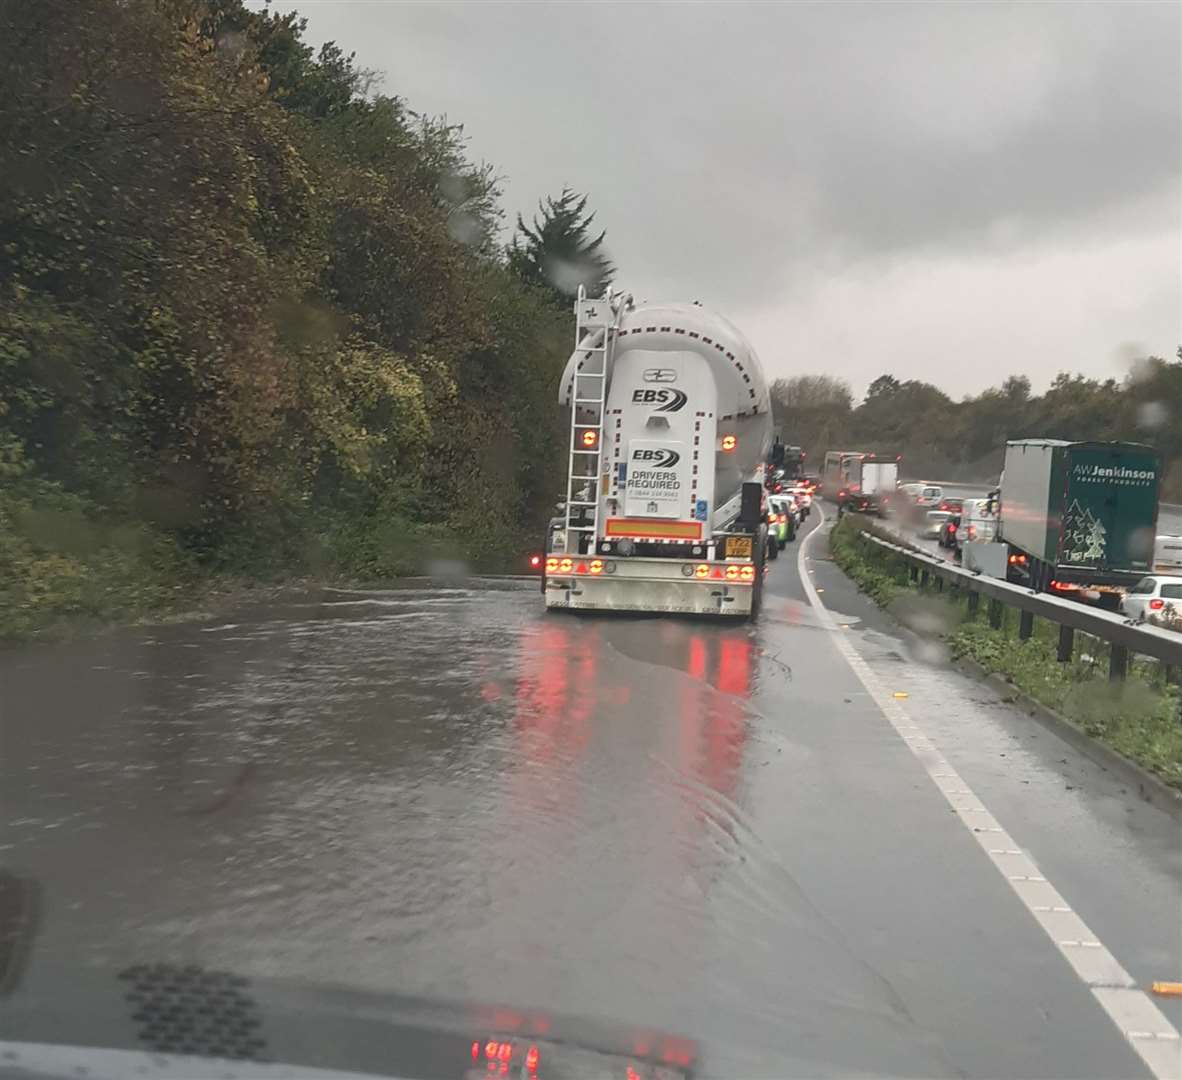 Flooded exit onto A249 at Key Street, Sittingbourne